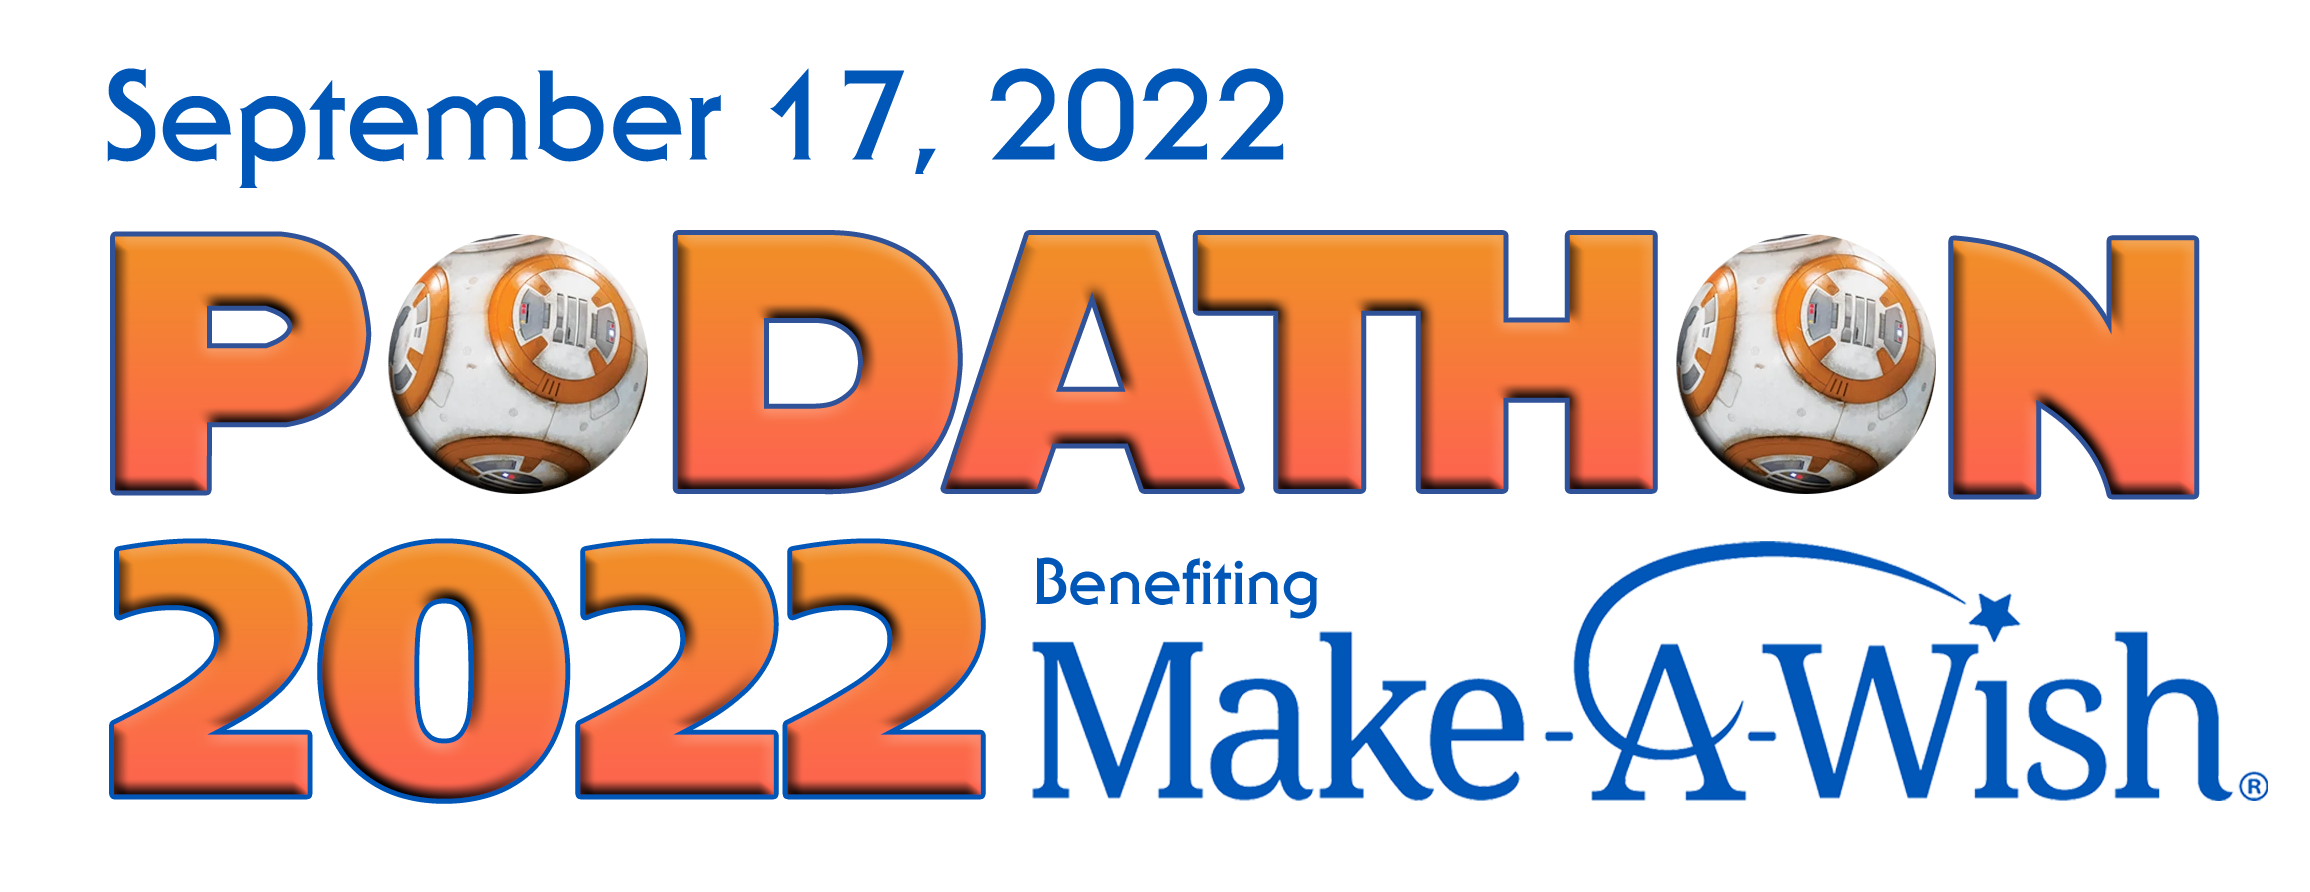 Seth Green to Be Featured Guest on Podathon 2022, Benefiting Make-A-Wish